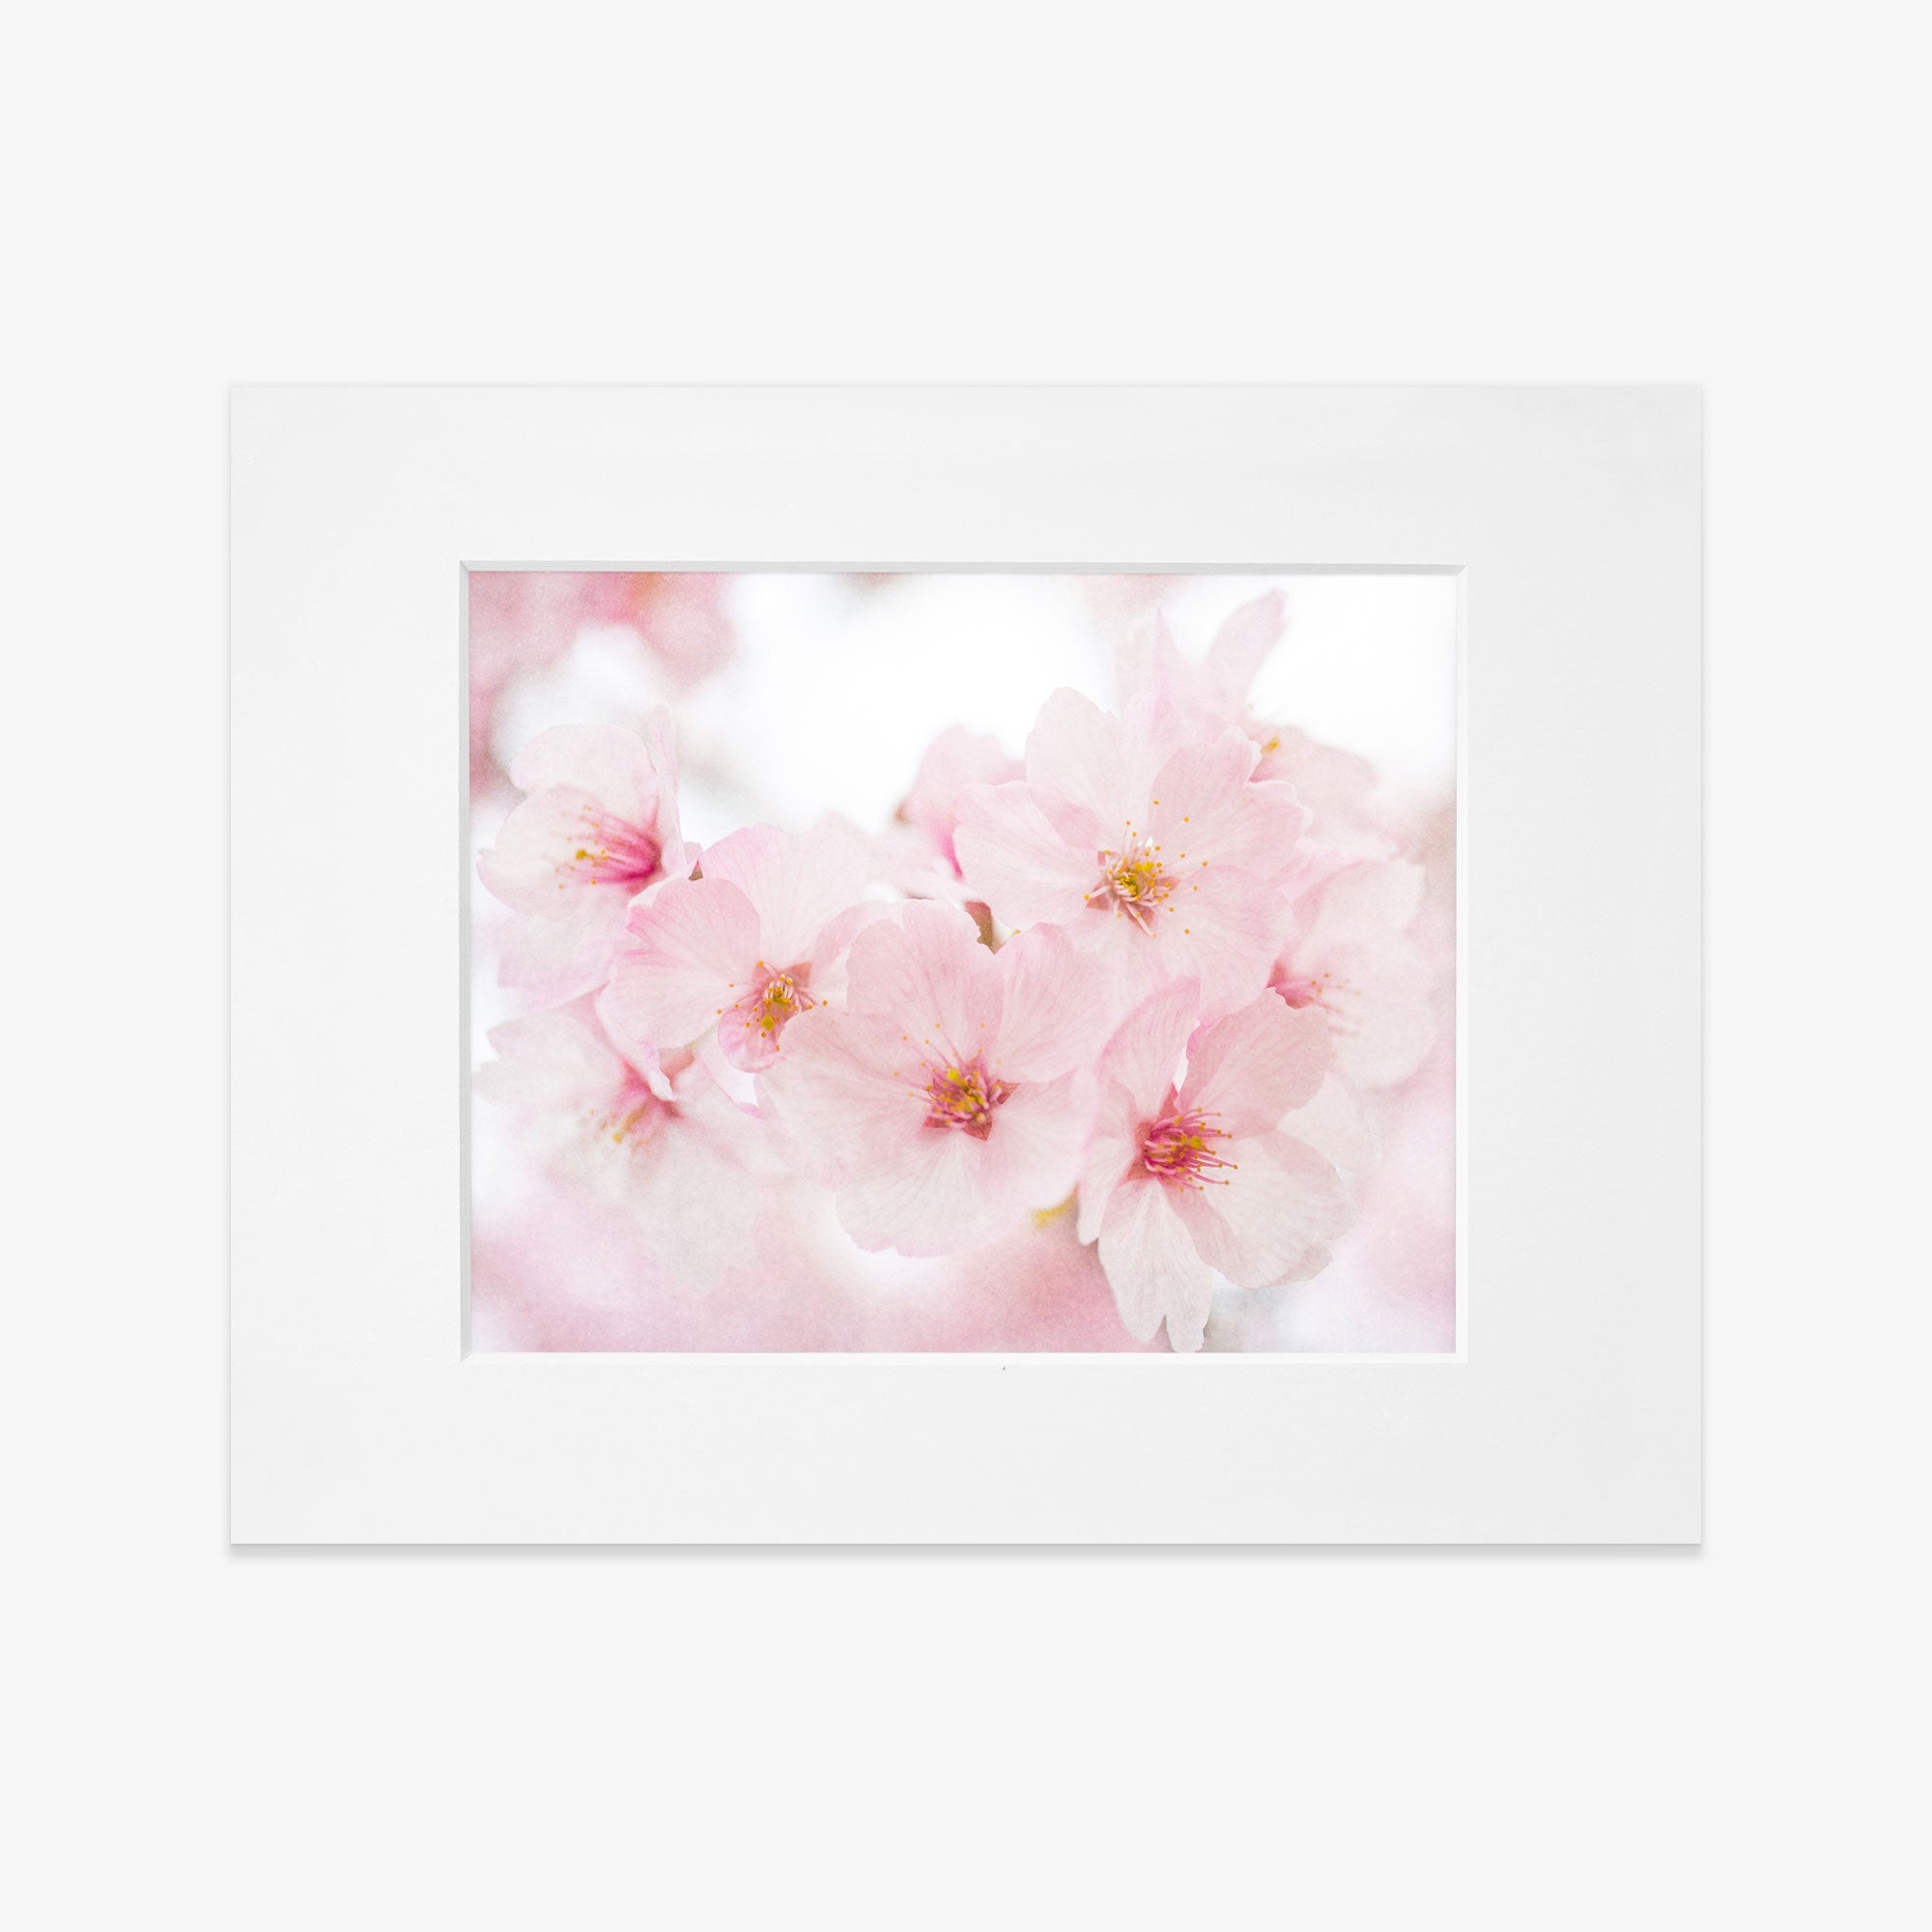 A framed photograph showcasing a close-up image of delicate pink cherry blossoms with visible shabby pink petals and central stamens, printed on archival photographic paper by Offley Green.